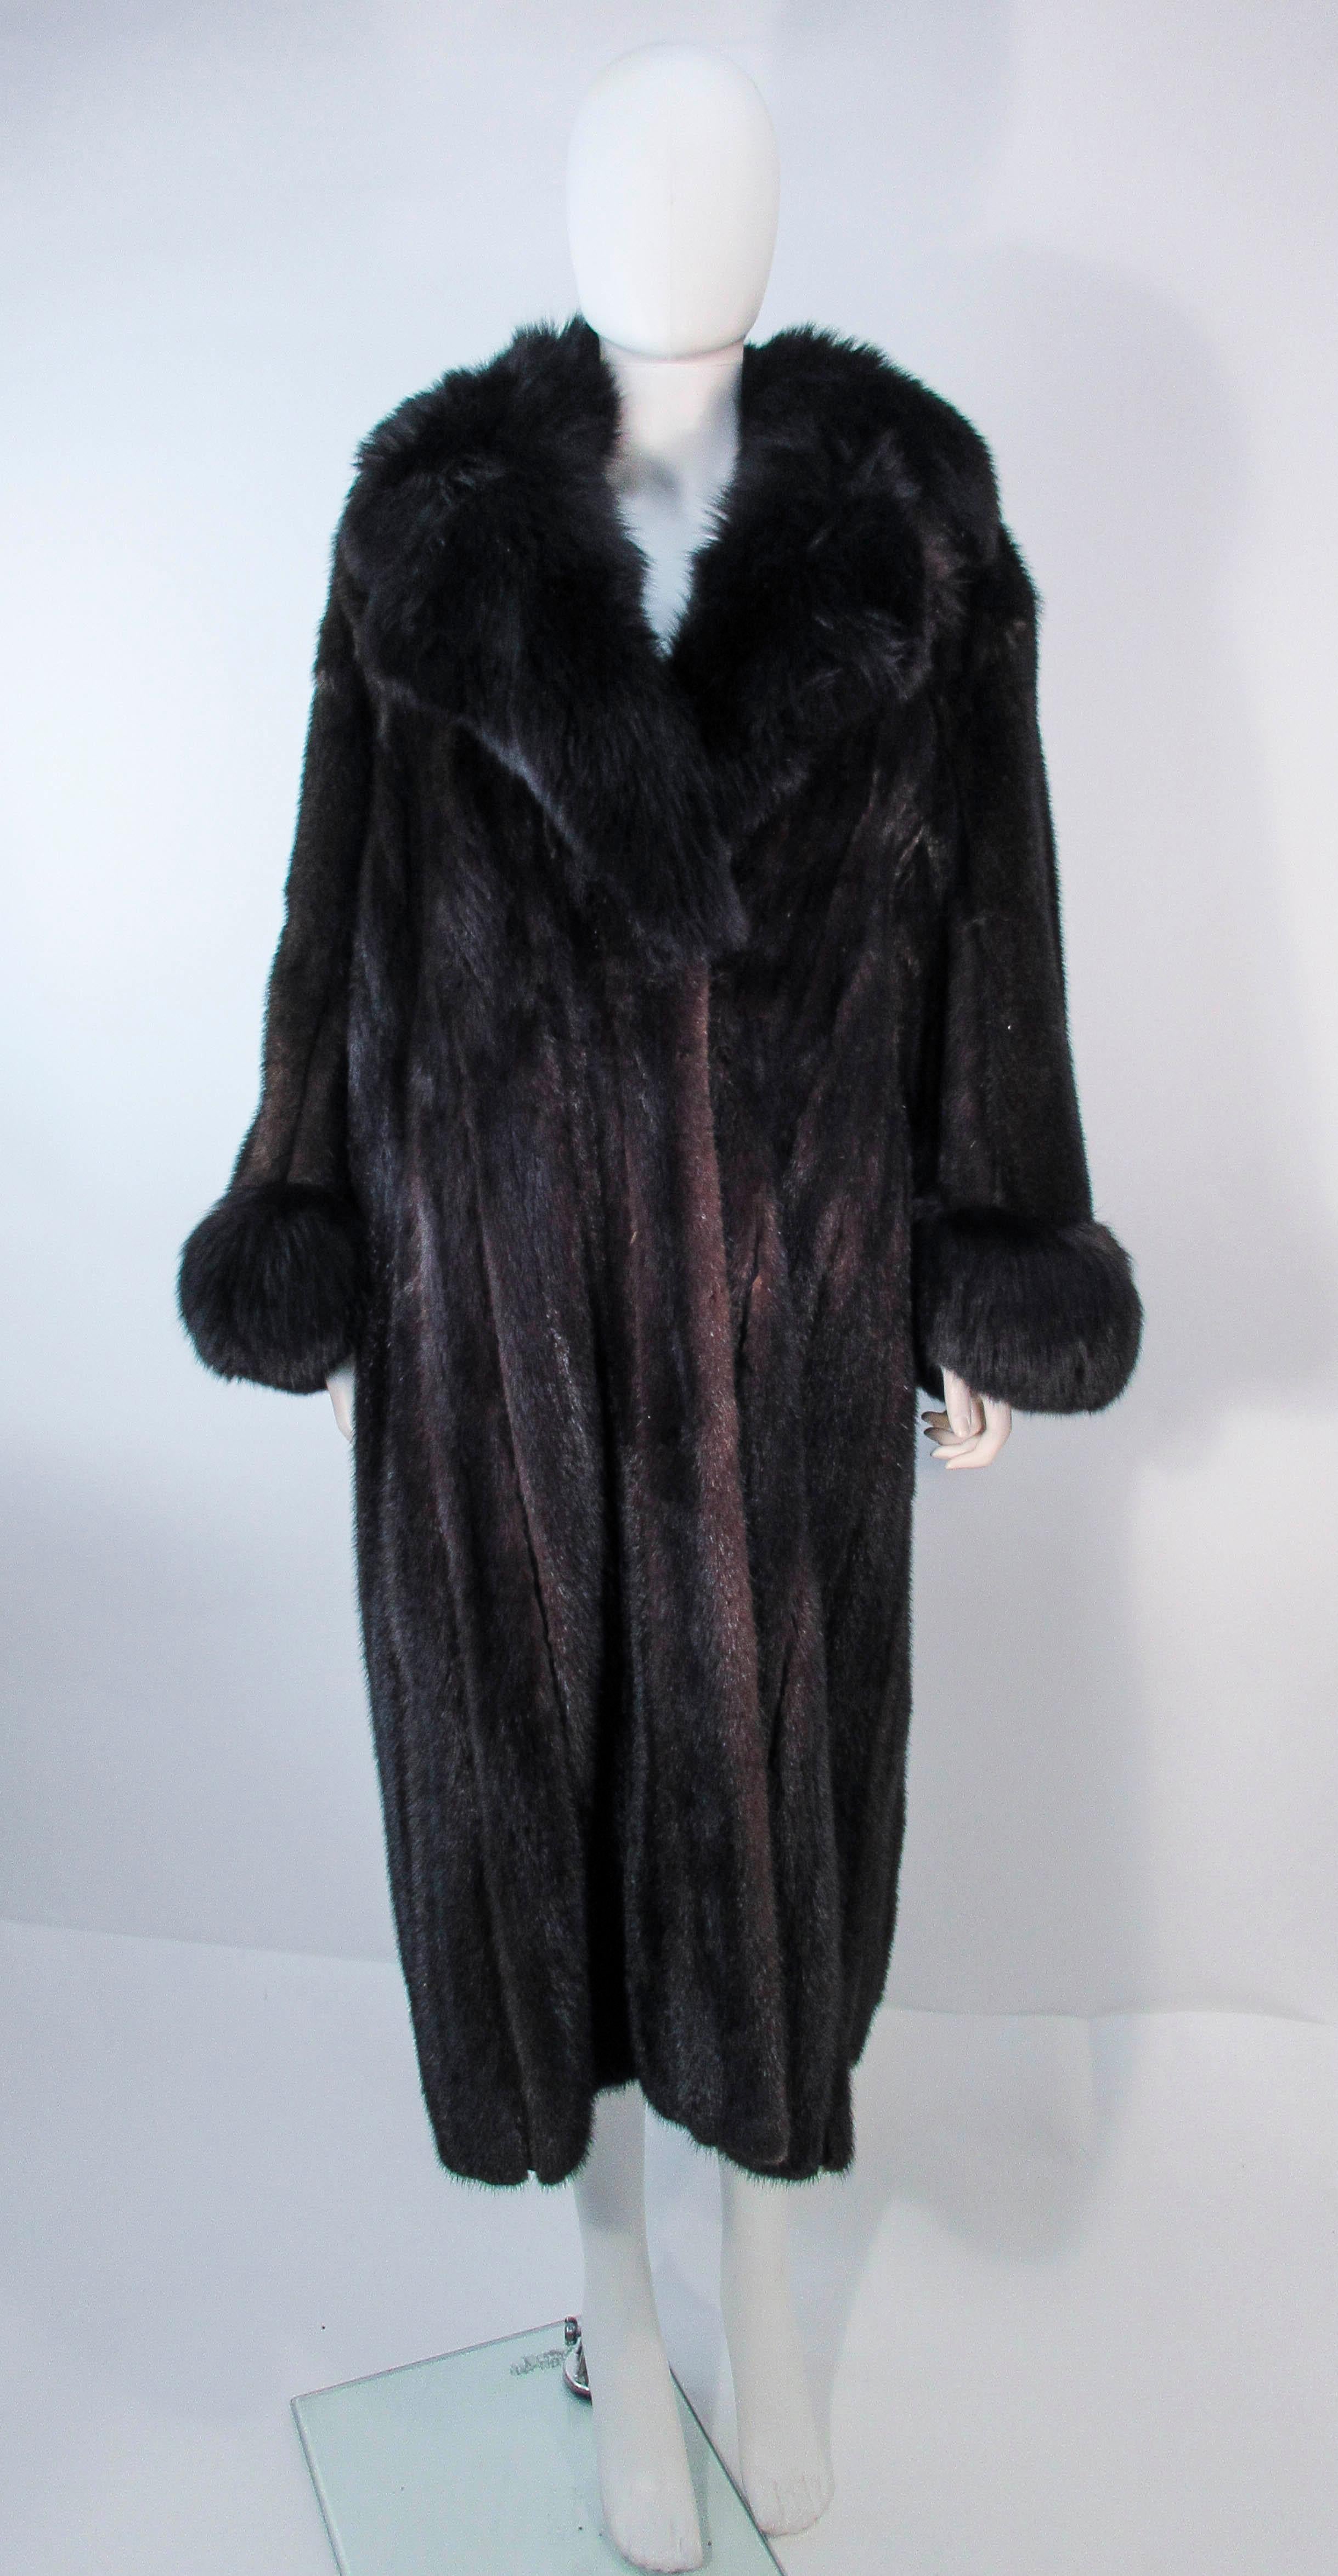 This coat is composed of a dark brown mink, and features fox fur cuffs with a fox fur collar. There are front closures. In excellent vintage condition, some signs of wear due to age. Please feel free to ask us any additional questions you may have.